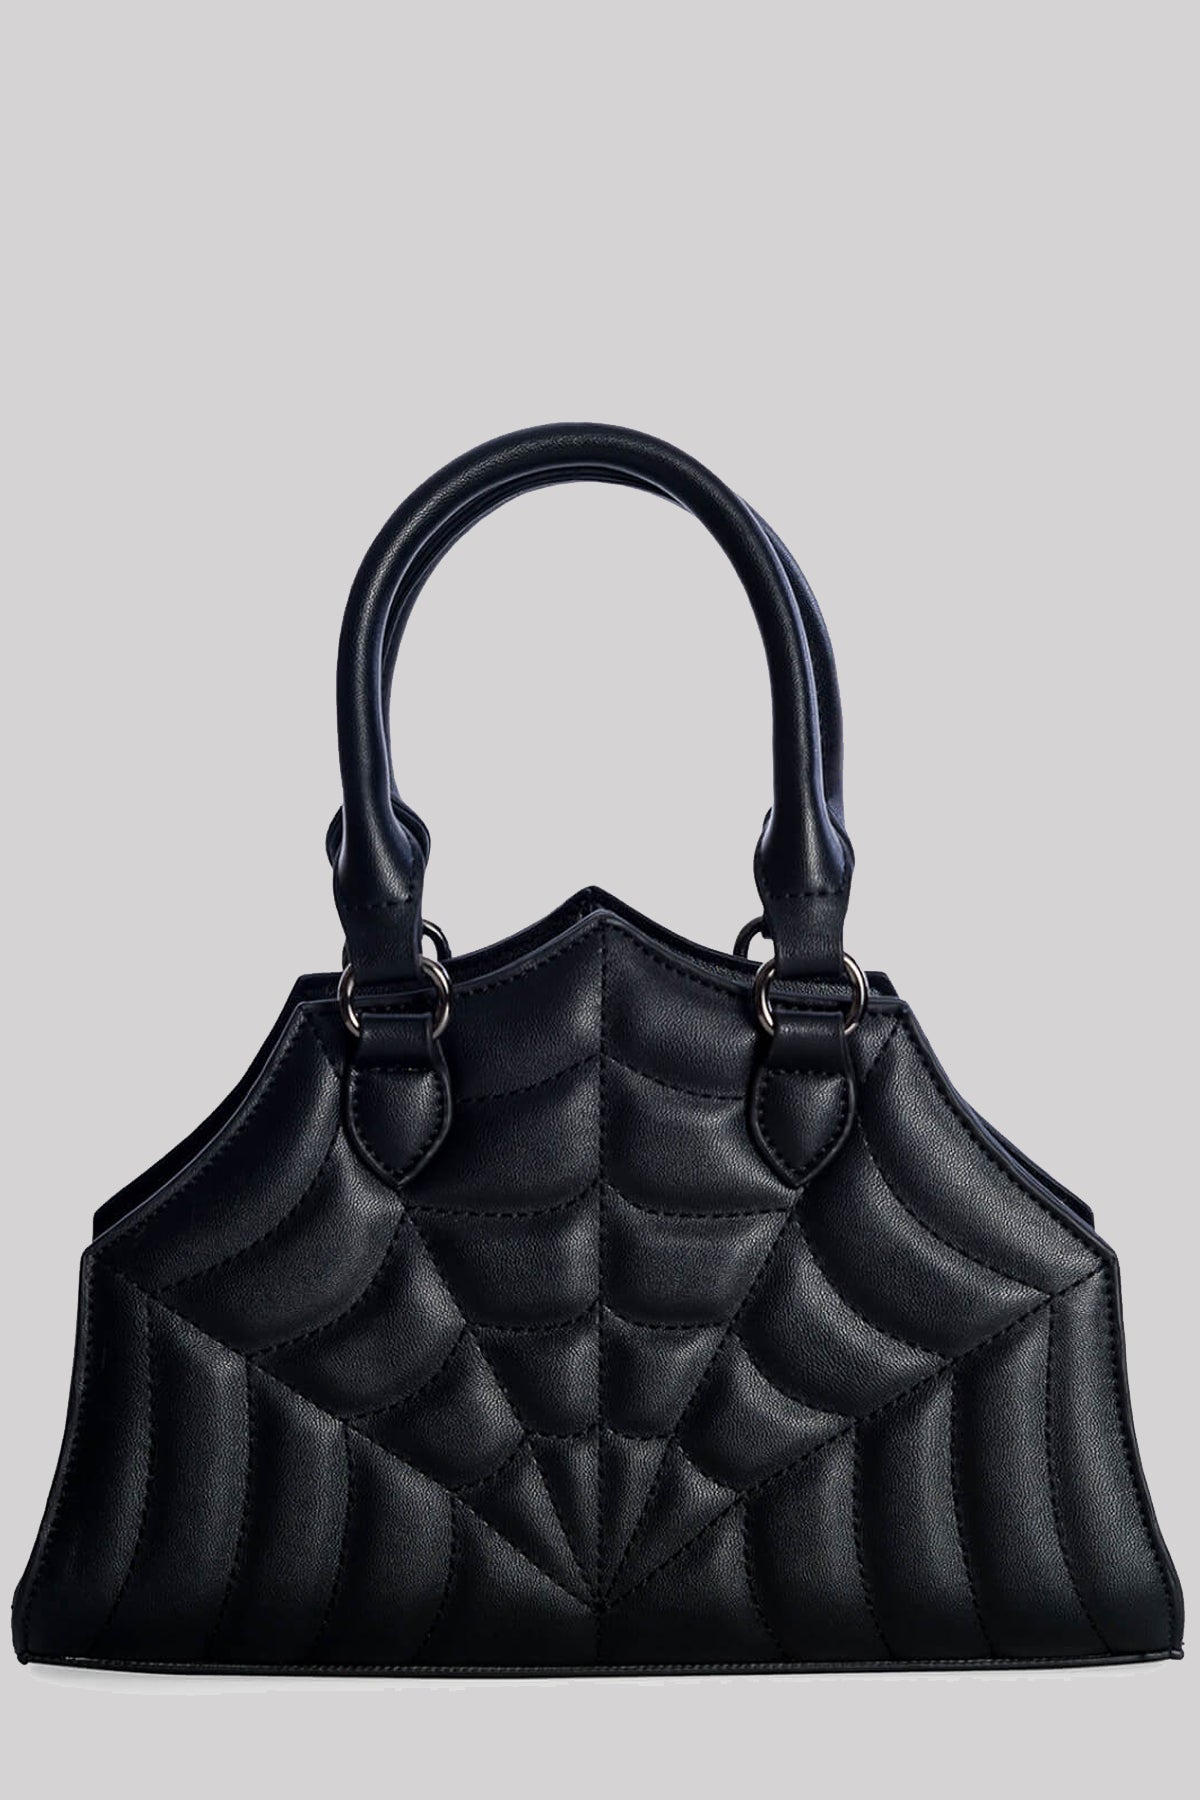 Banned Sirin Quilted Spiderweb Gothic Bag